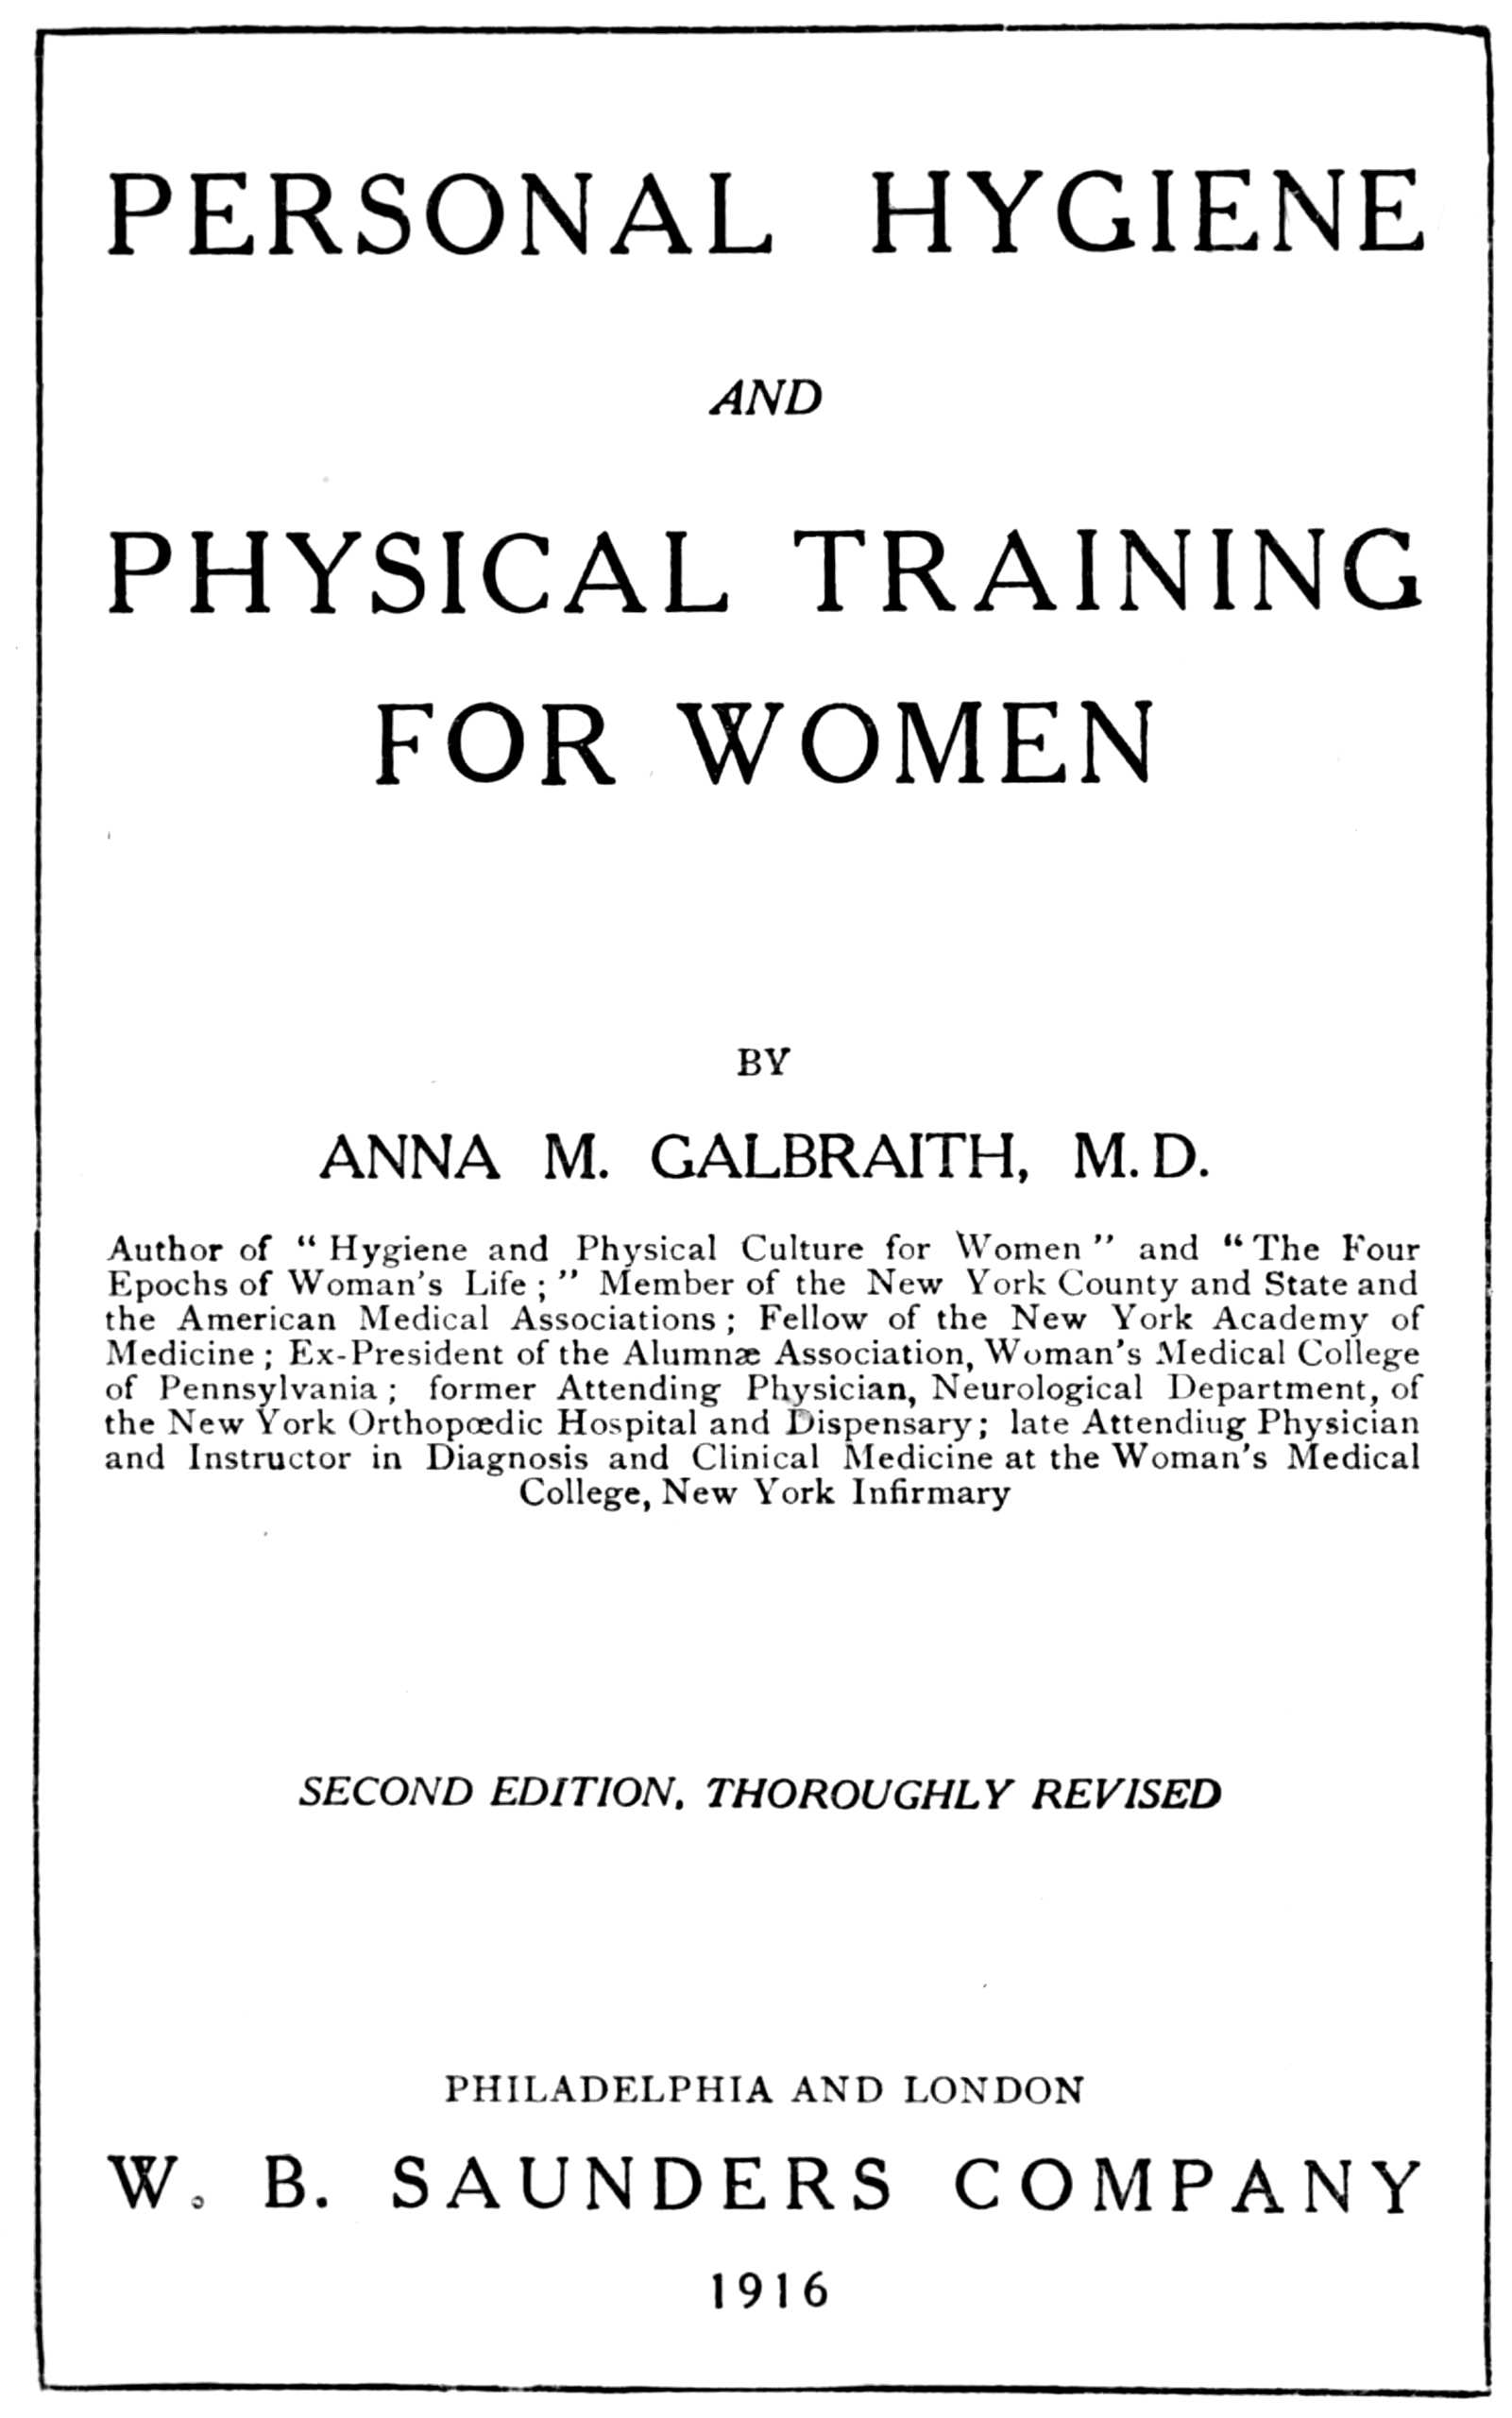 Personal hygiene and physical training for women